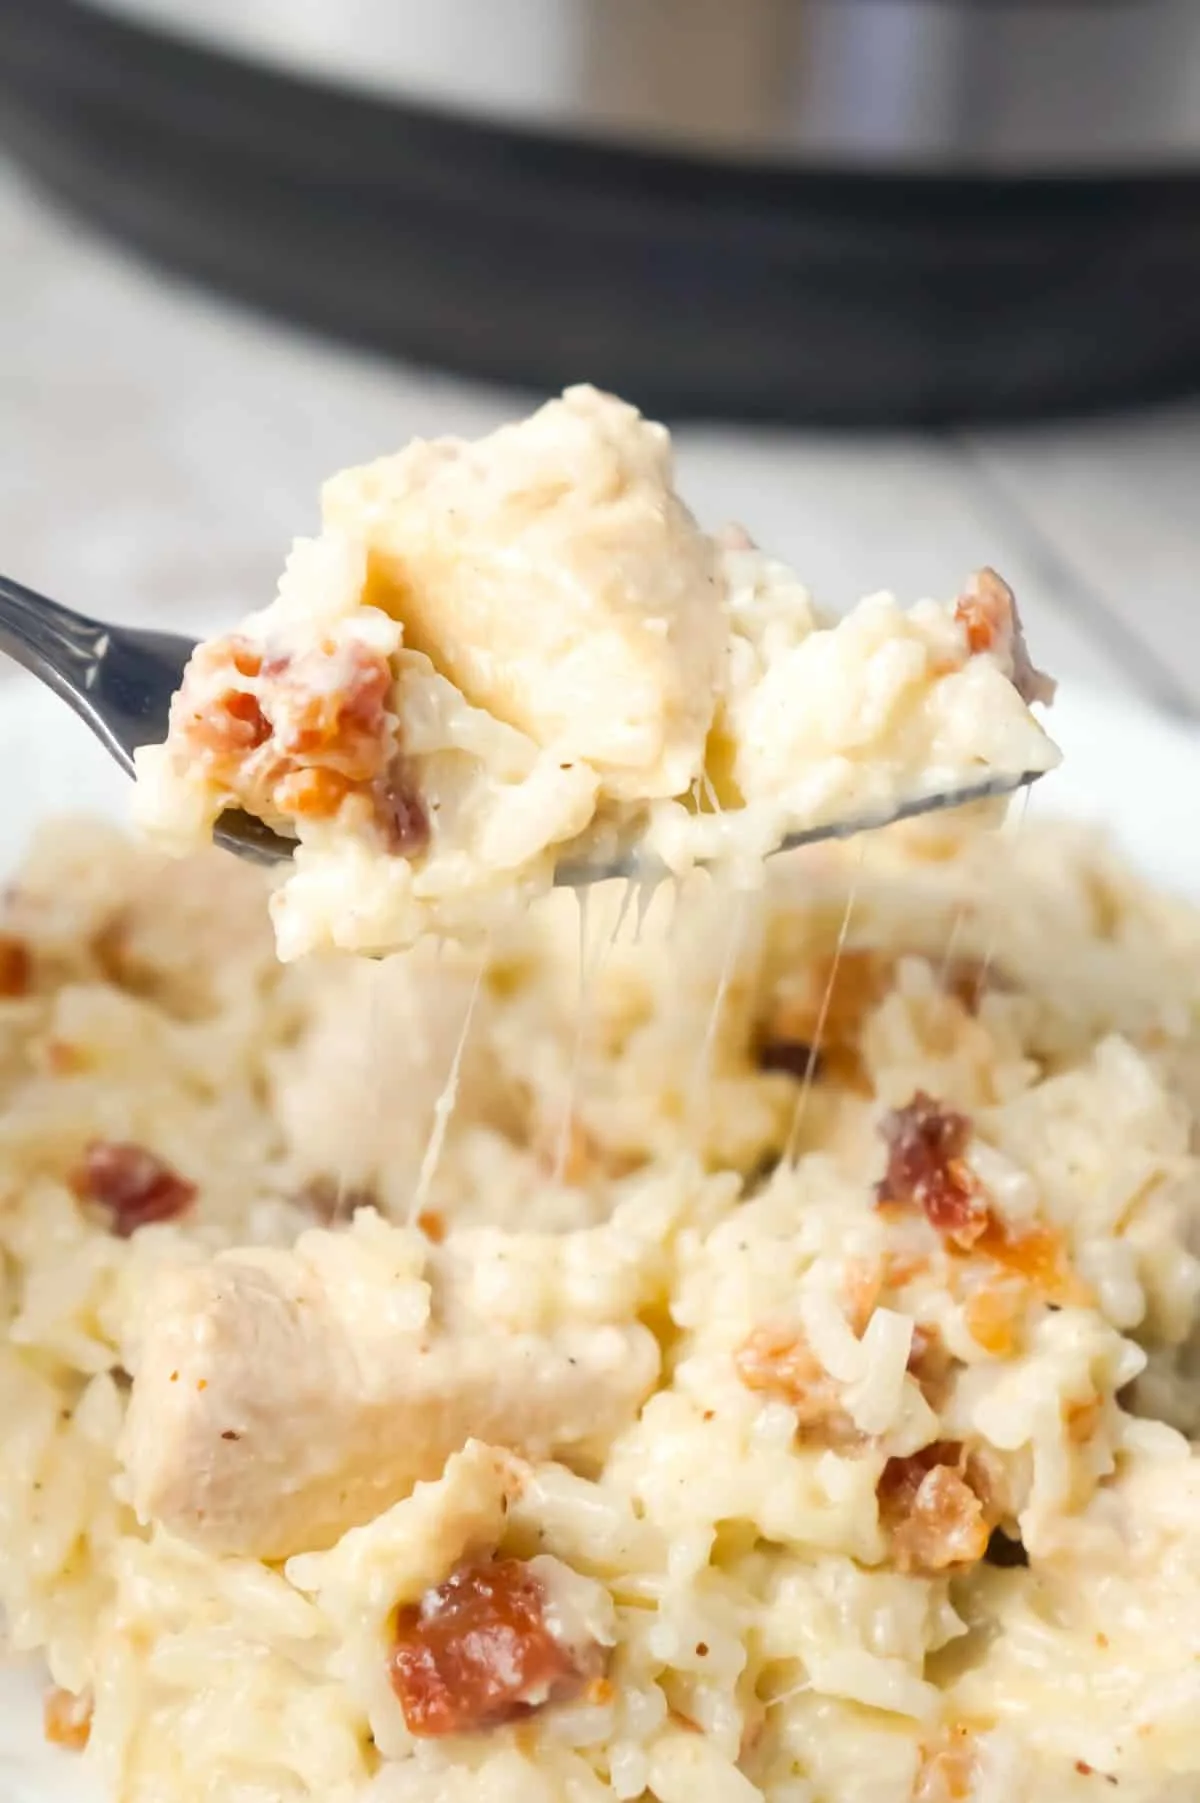 Instant Pot Bacon Parmesan Chicken and Rice is an easy pressure cooker chicken dinner recipe made with boneless, skinless chicken breasts and long grain rice, loaded with crumbled bacon and Parmesan cheese.